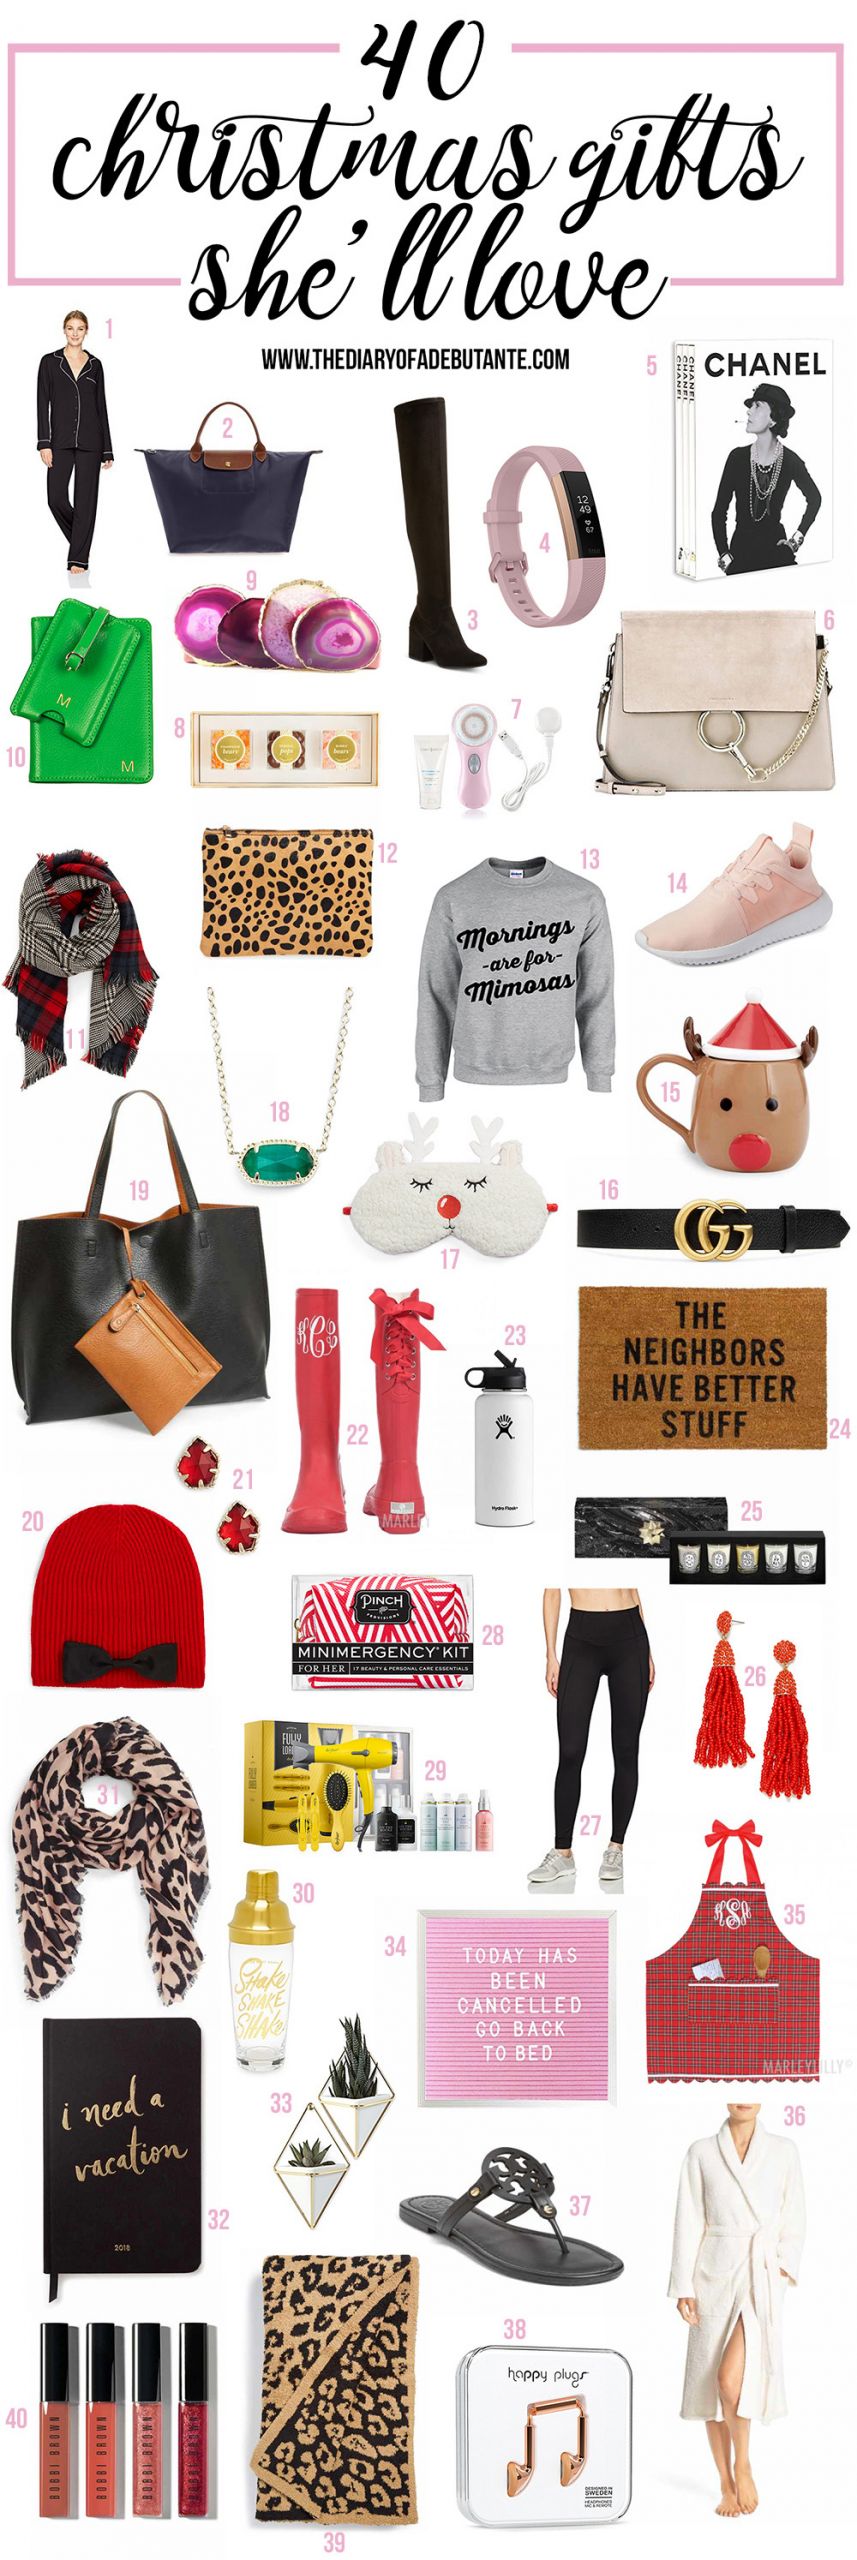 Christmas Gift Ideas For My Girlfriend
 Cool Gift Ideas for Girlfriend Mom or BFF this Holiday